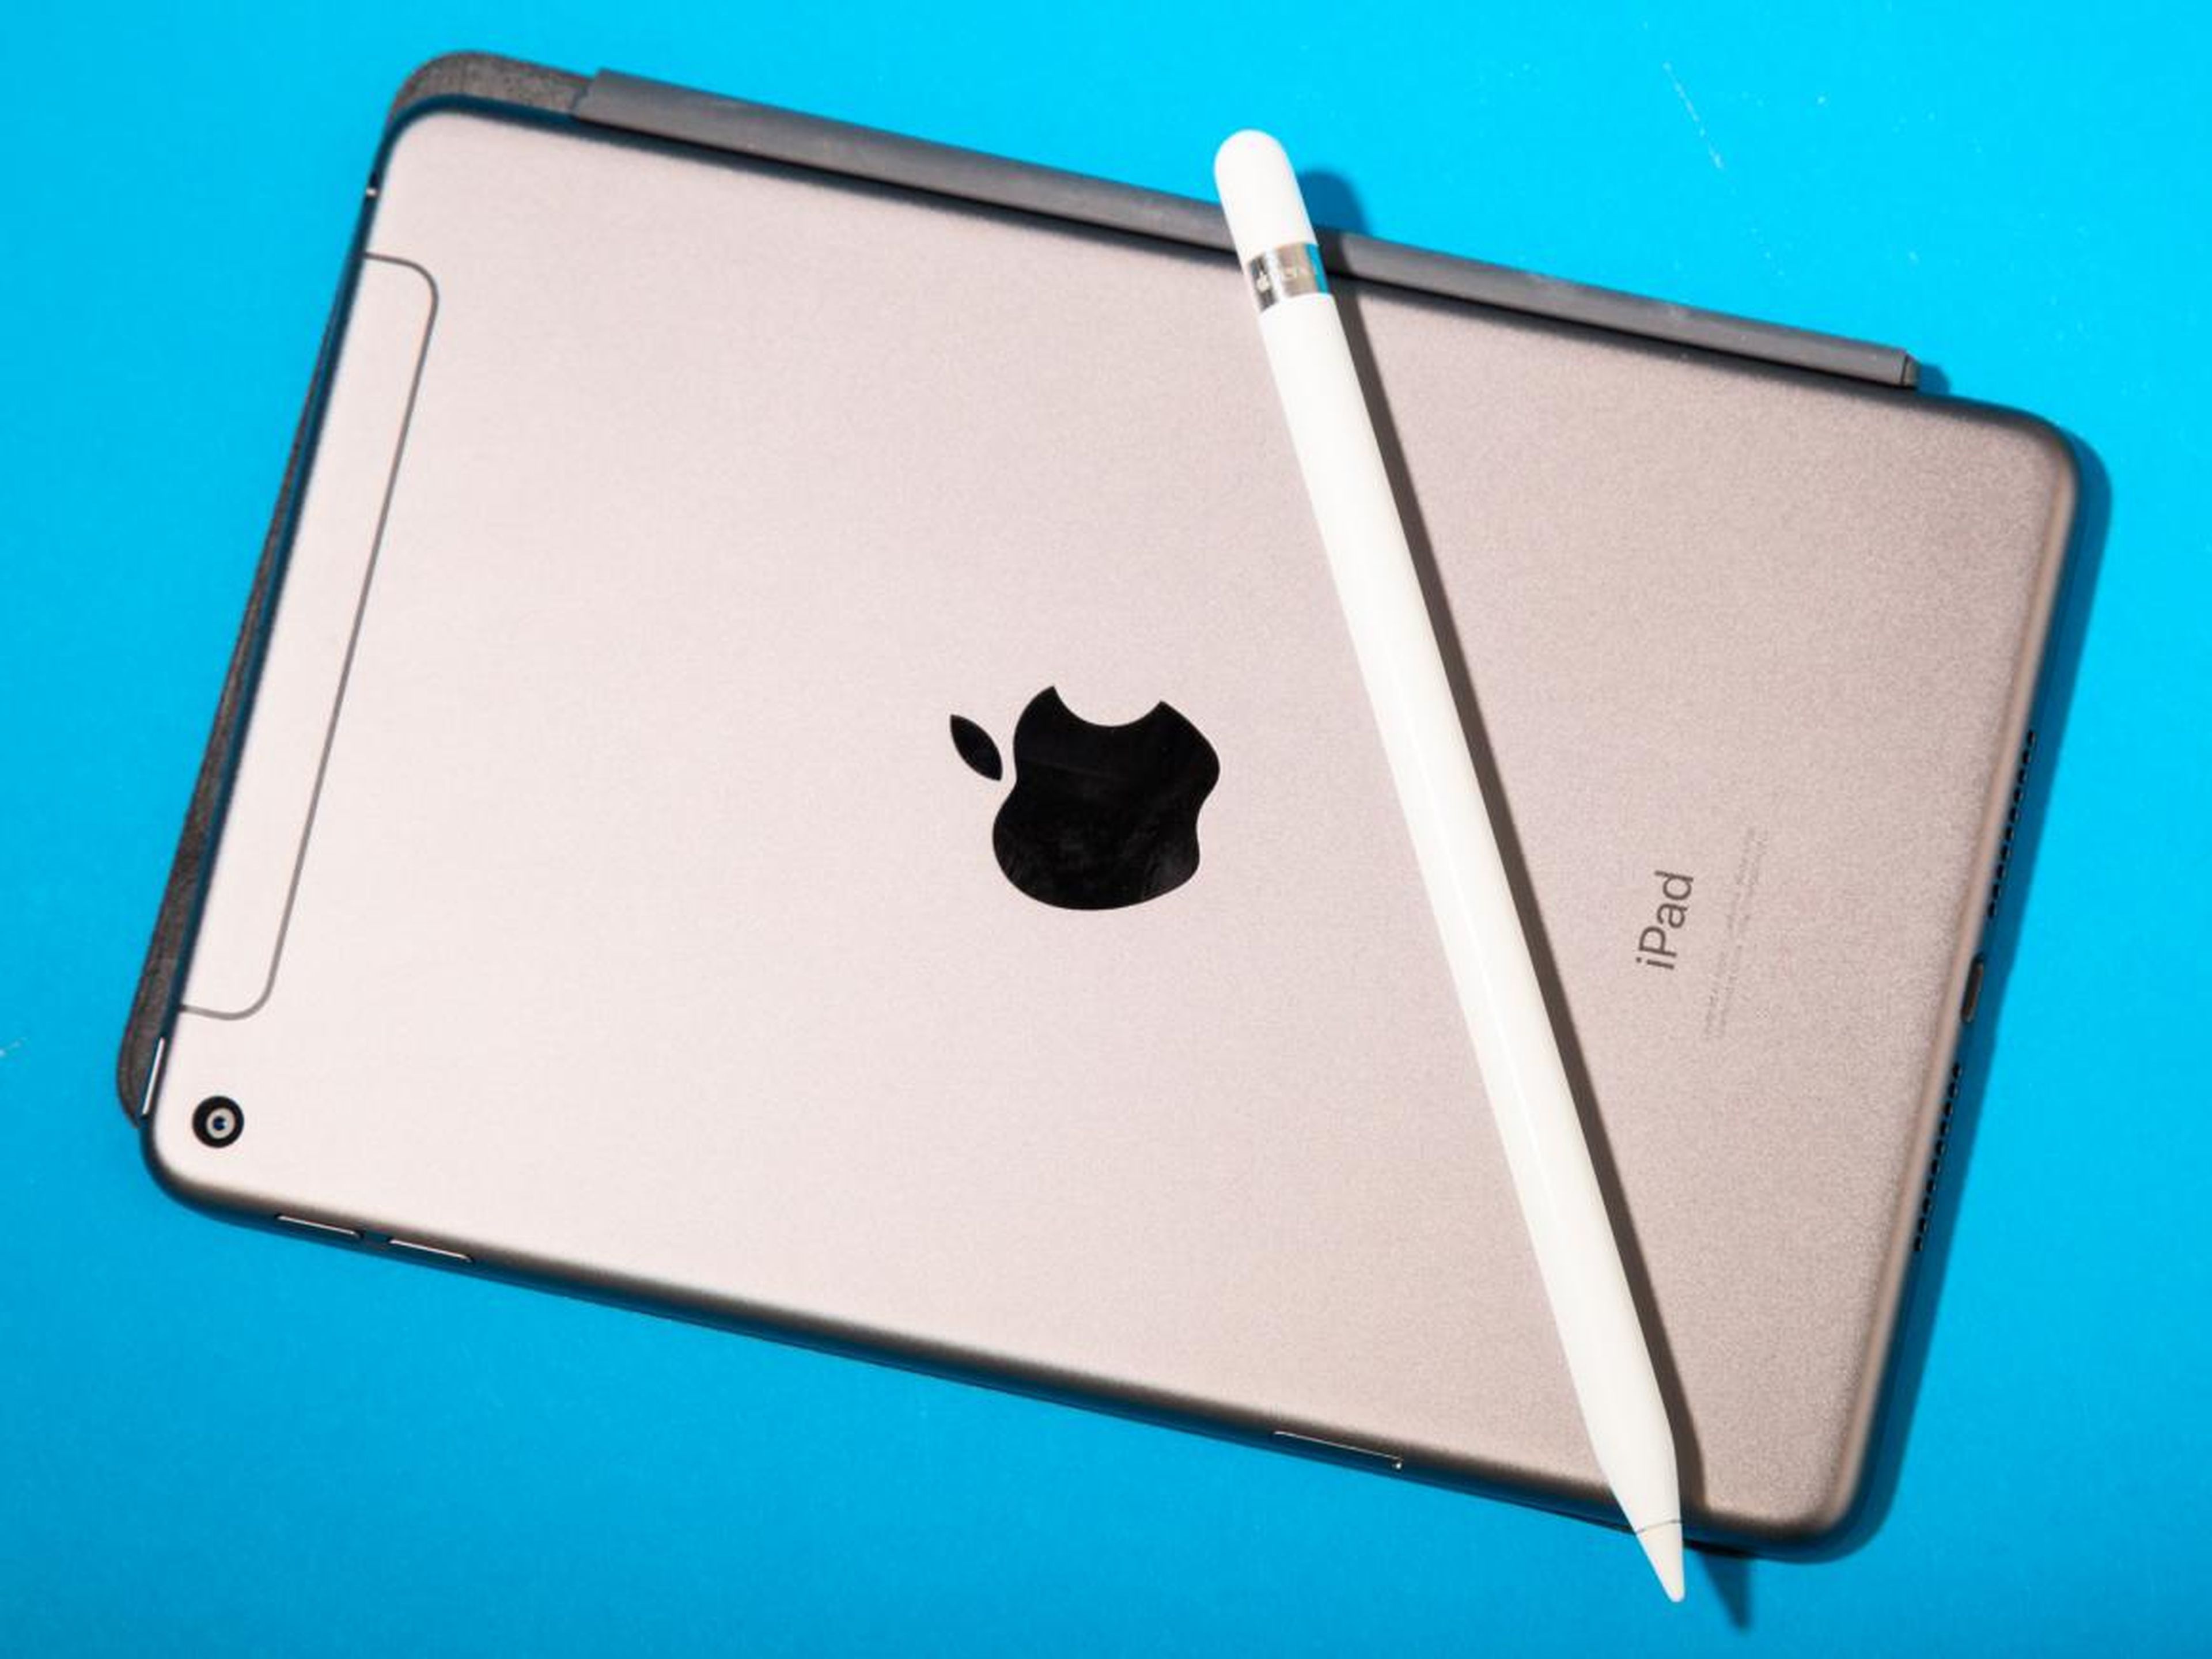 Apple sells four different iPad models — here's which ones are the newest